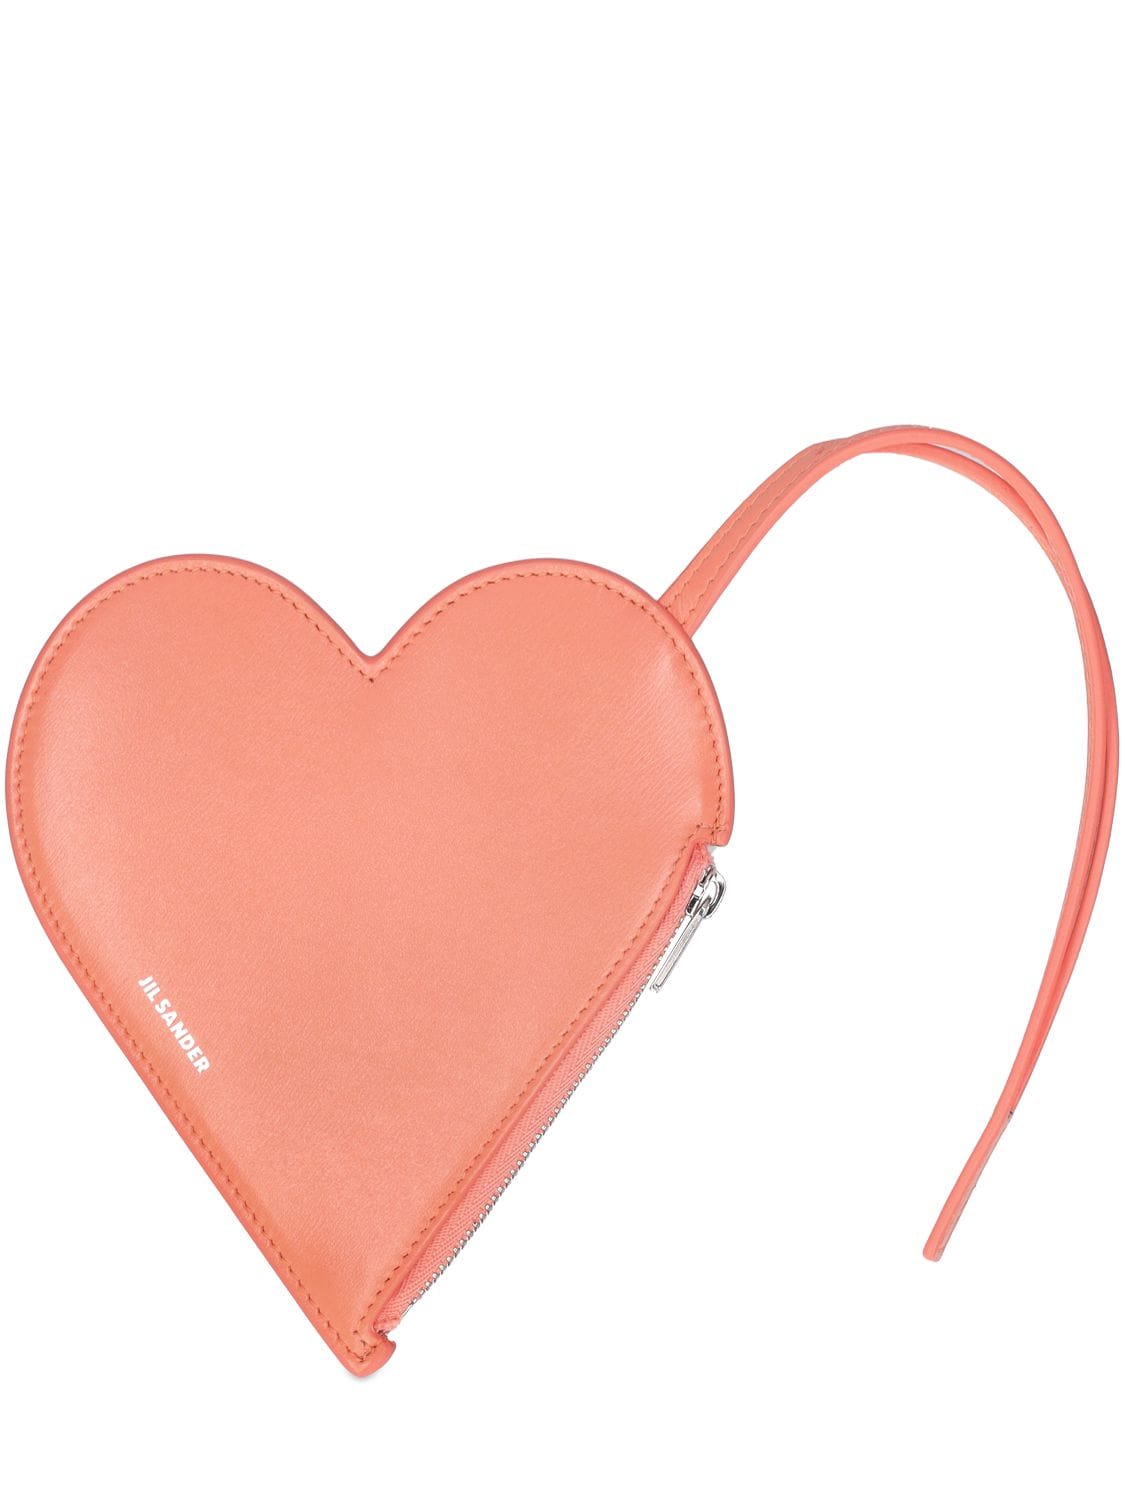 Image of Leather Heart-shaped Pouch